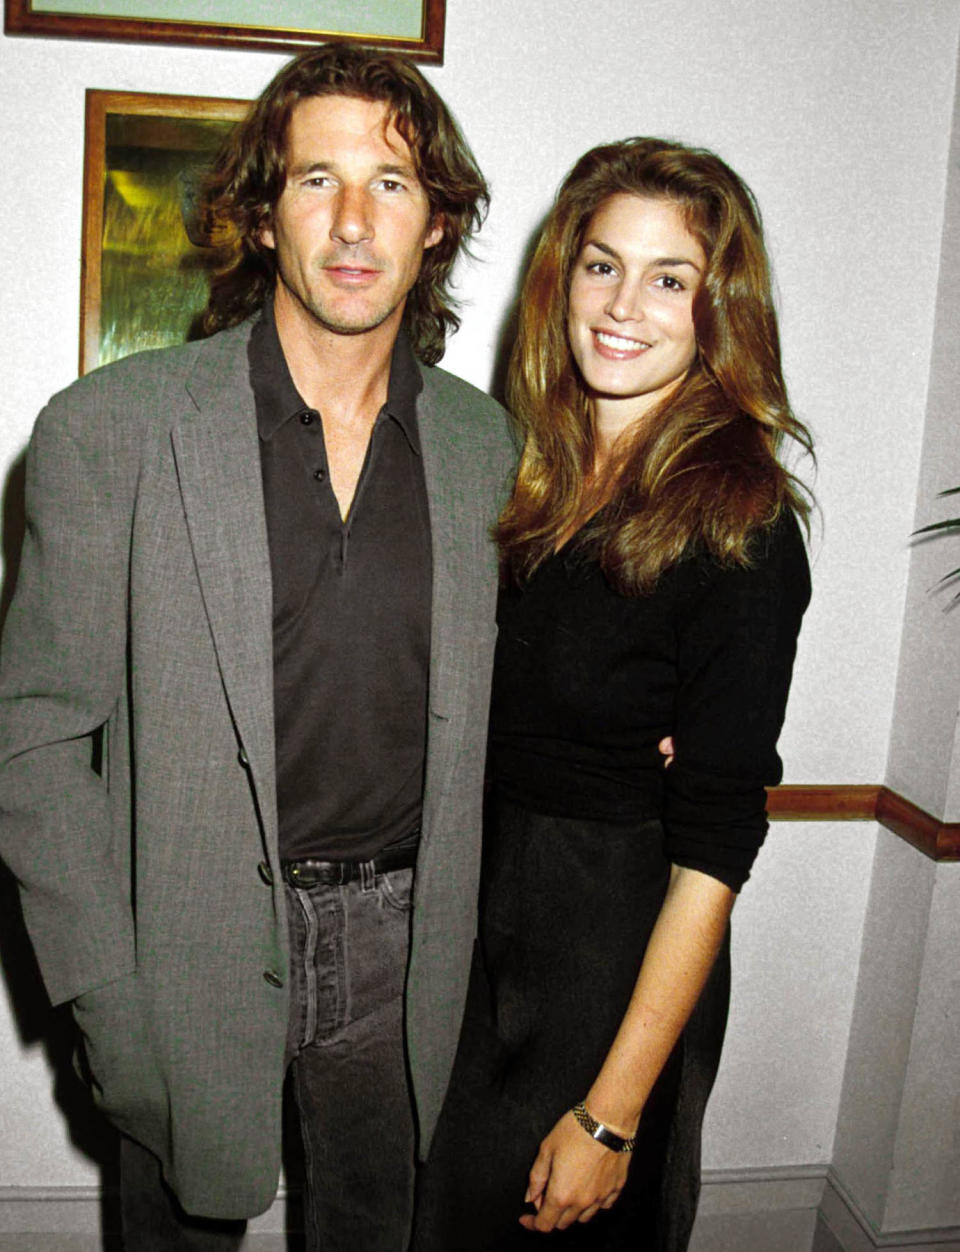 Cindy Crawford And Richard Gere, Mr Jones Premiere (Dave Benett / Getty Images)